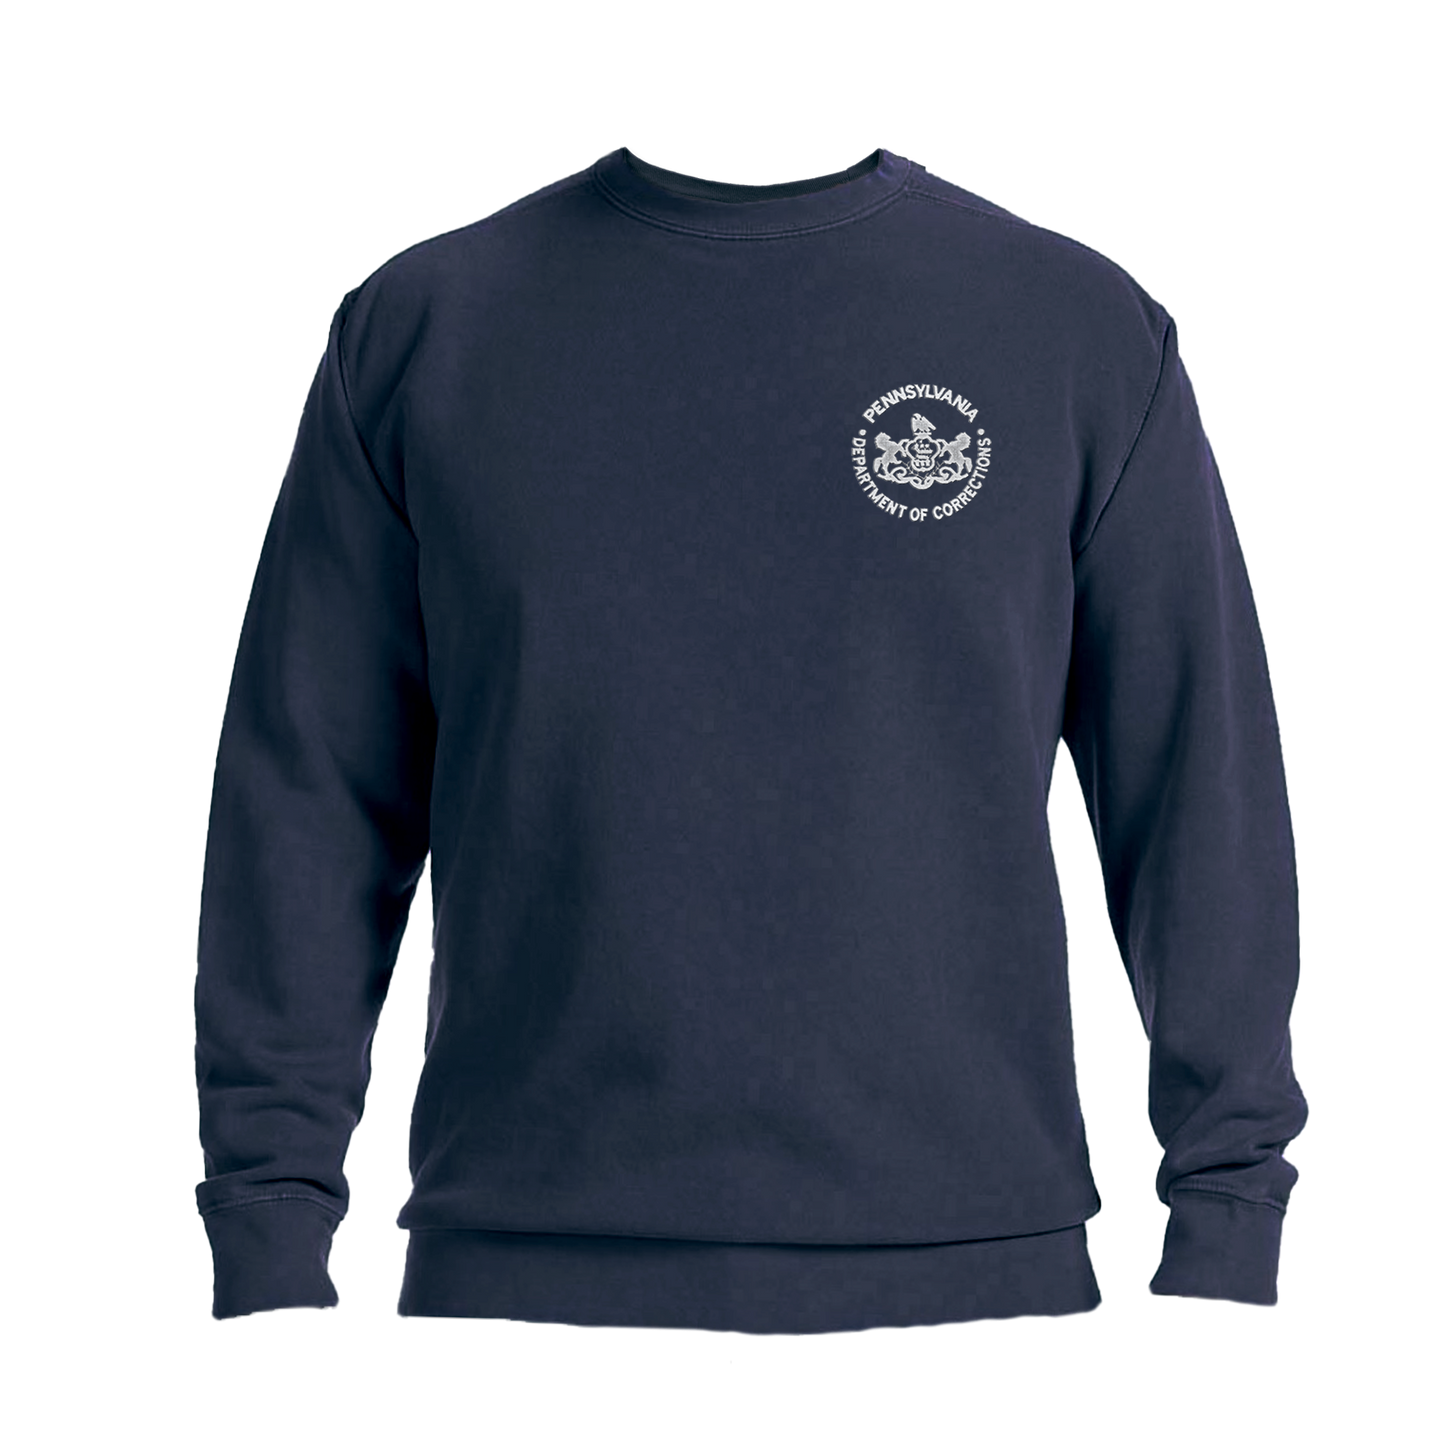 Adult Comfort Colors Crewneck Sweatshirt with Embroidered Department of Corrections Seal (Various Colors)